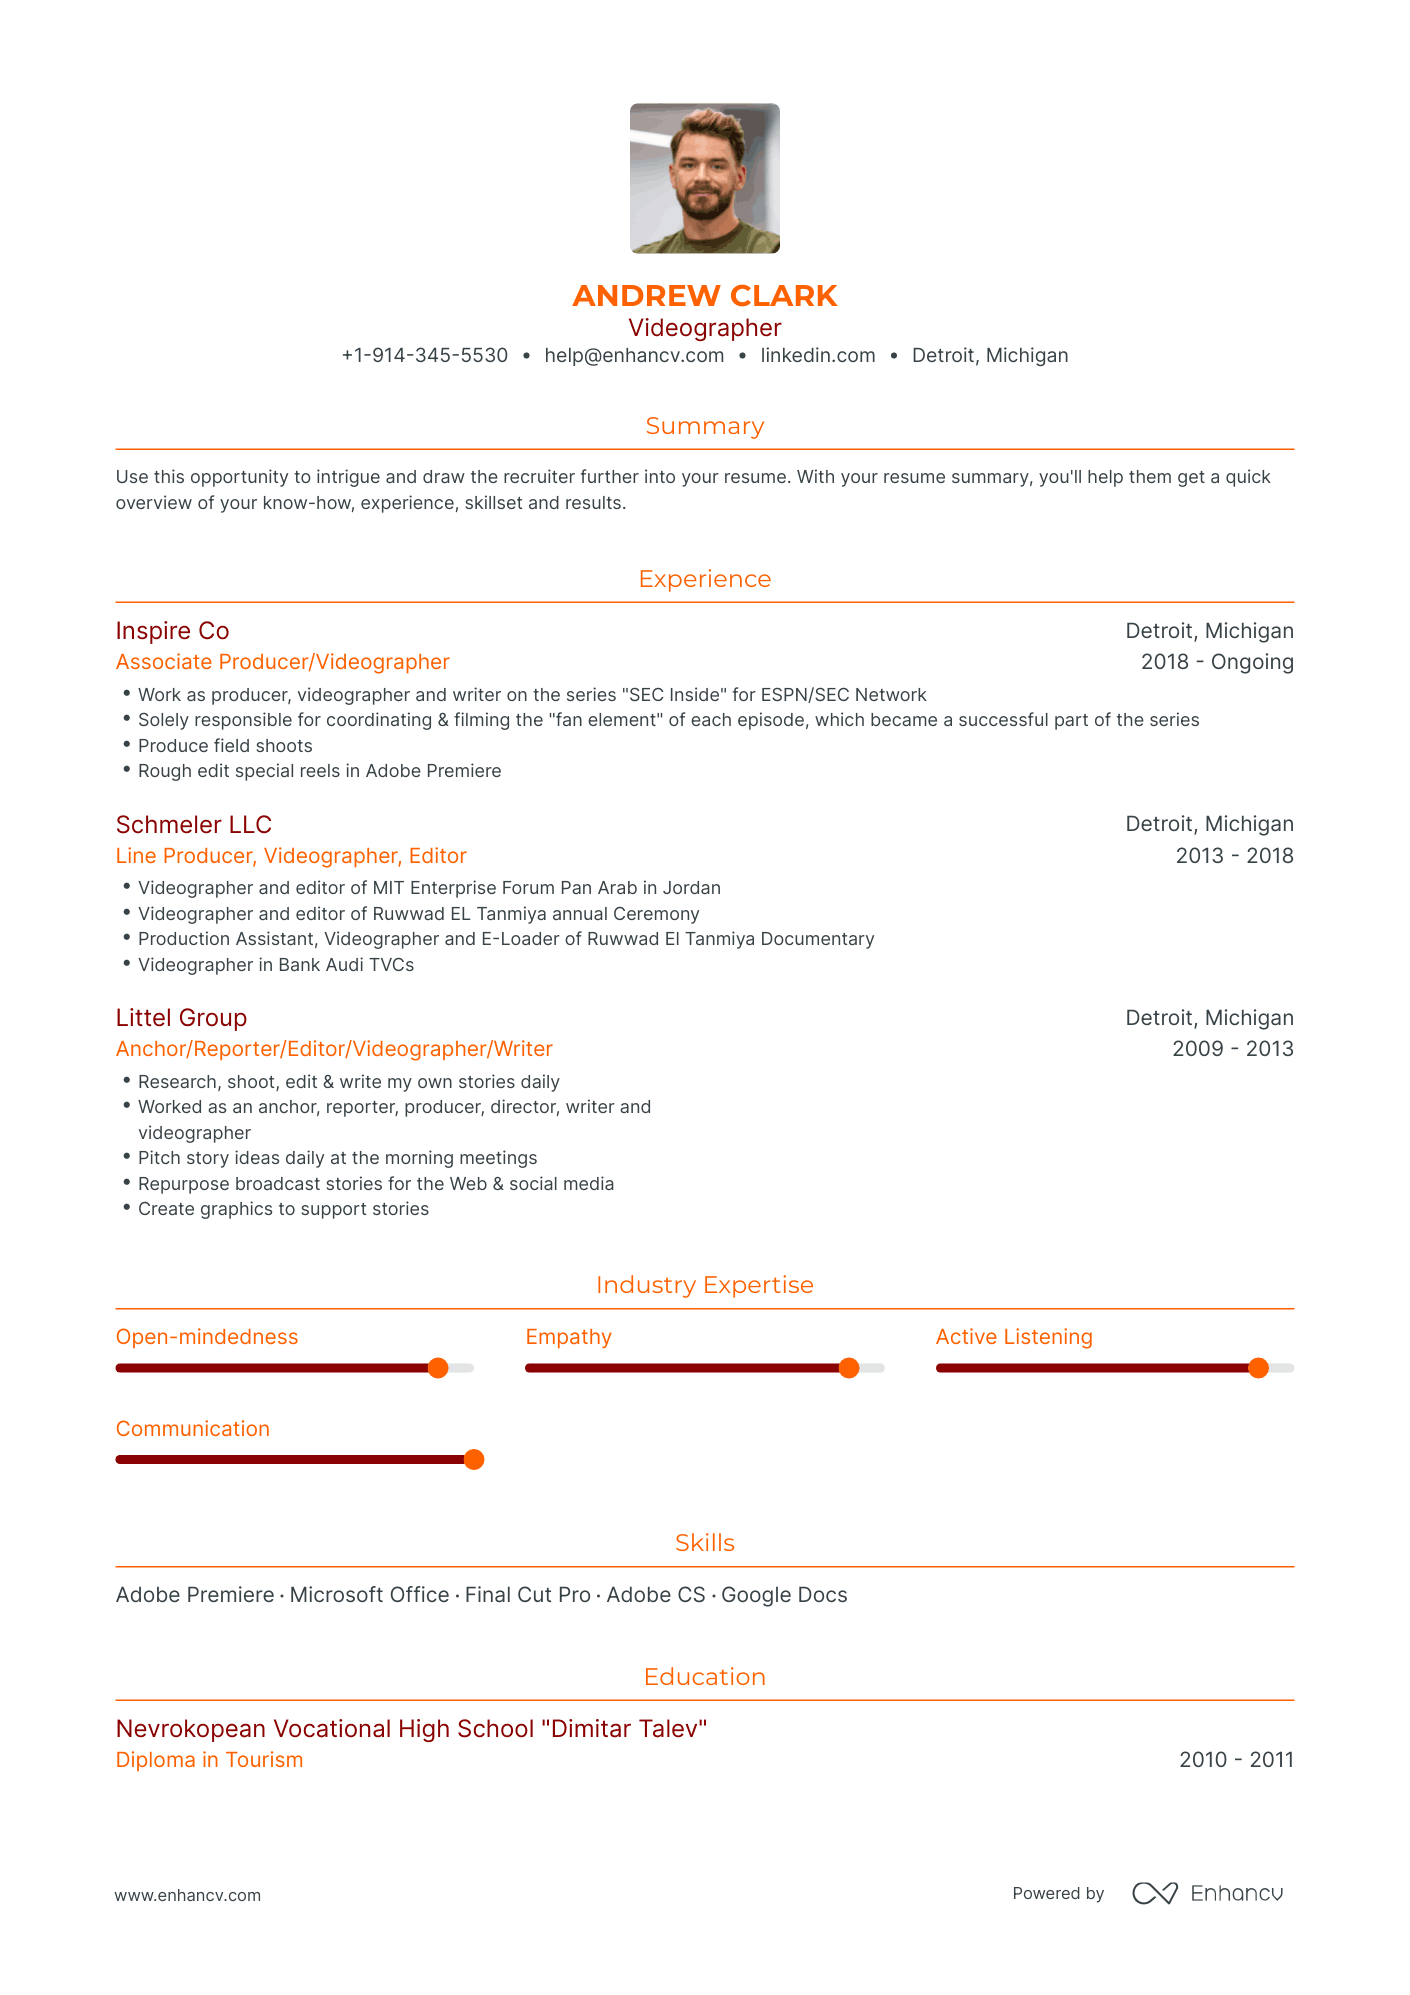 Traditional Videographer Resume Template